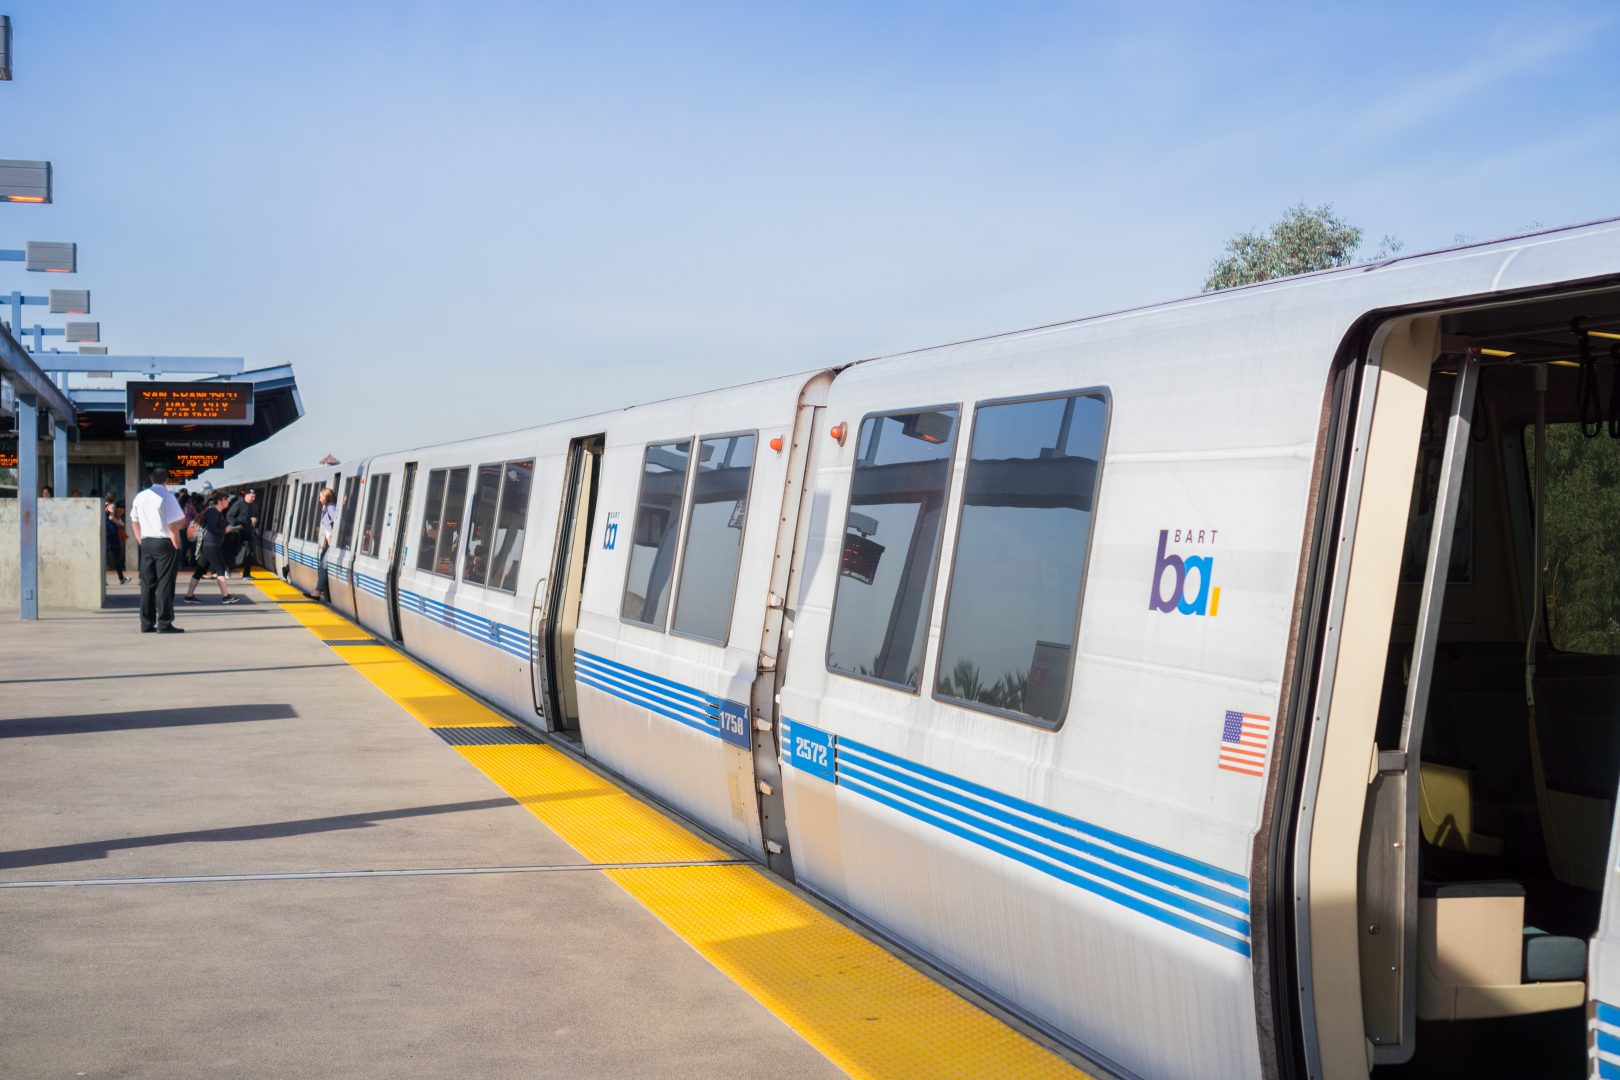 Black man cited for eating sandwich files racial profiling claim against BART